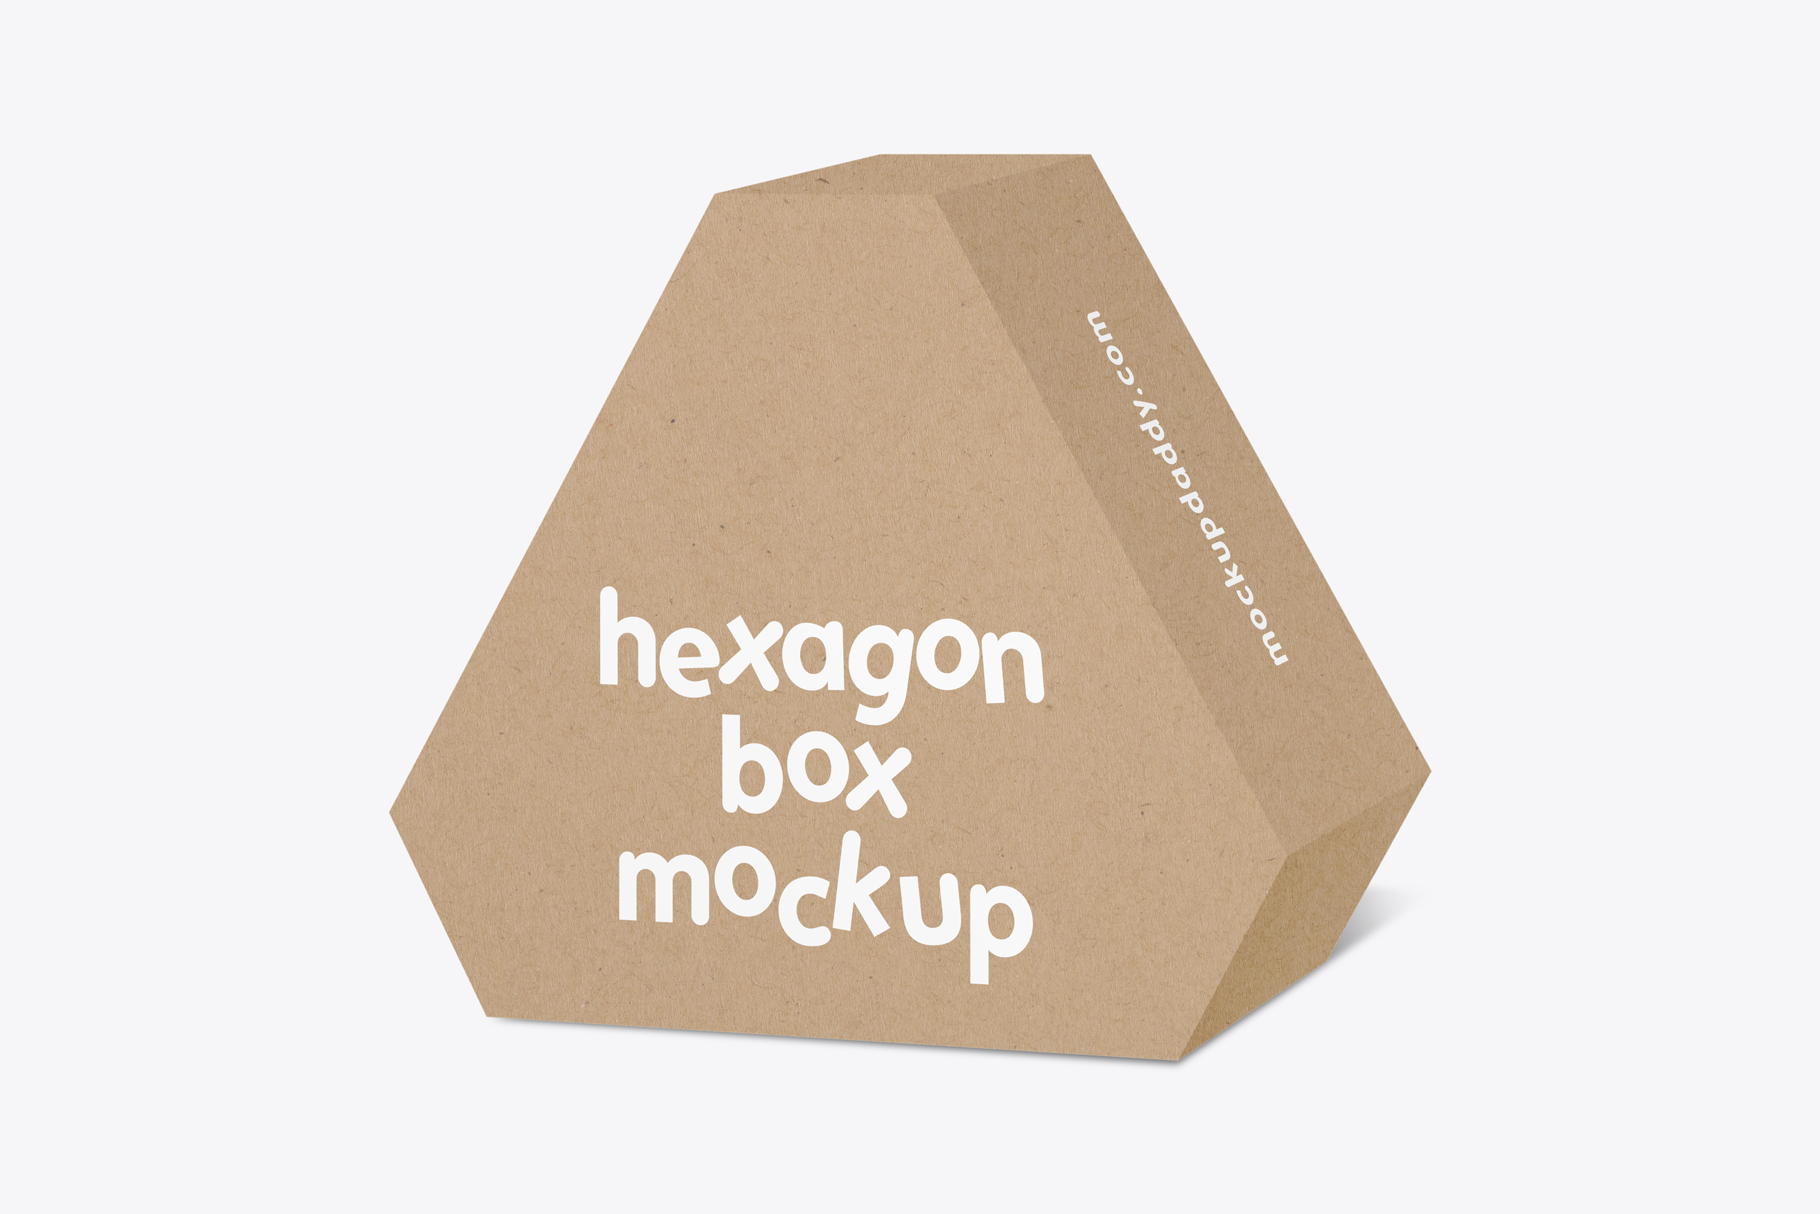 Hexagon Box Mockup in brown color on white background